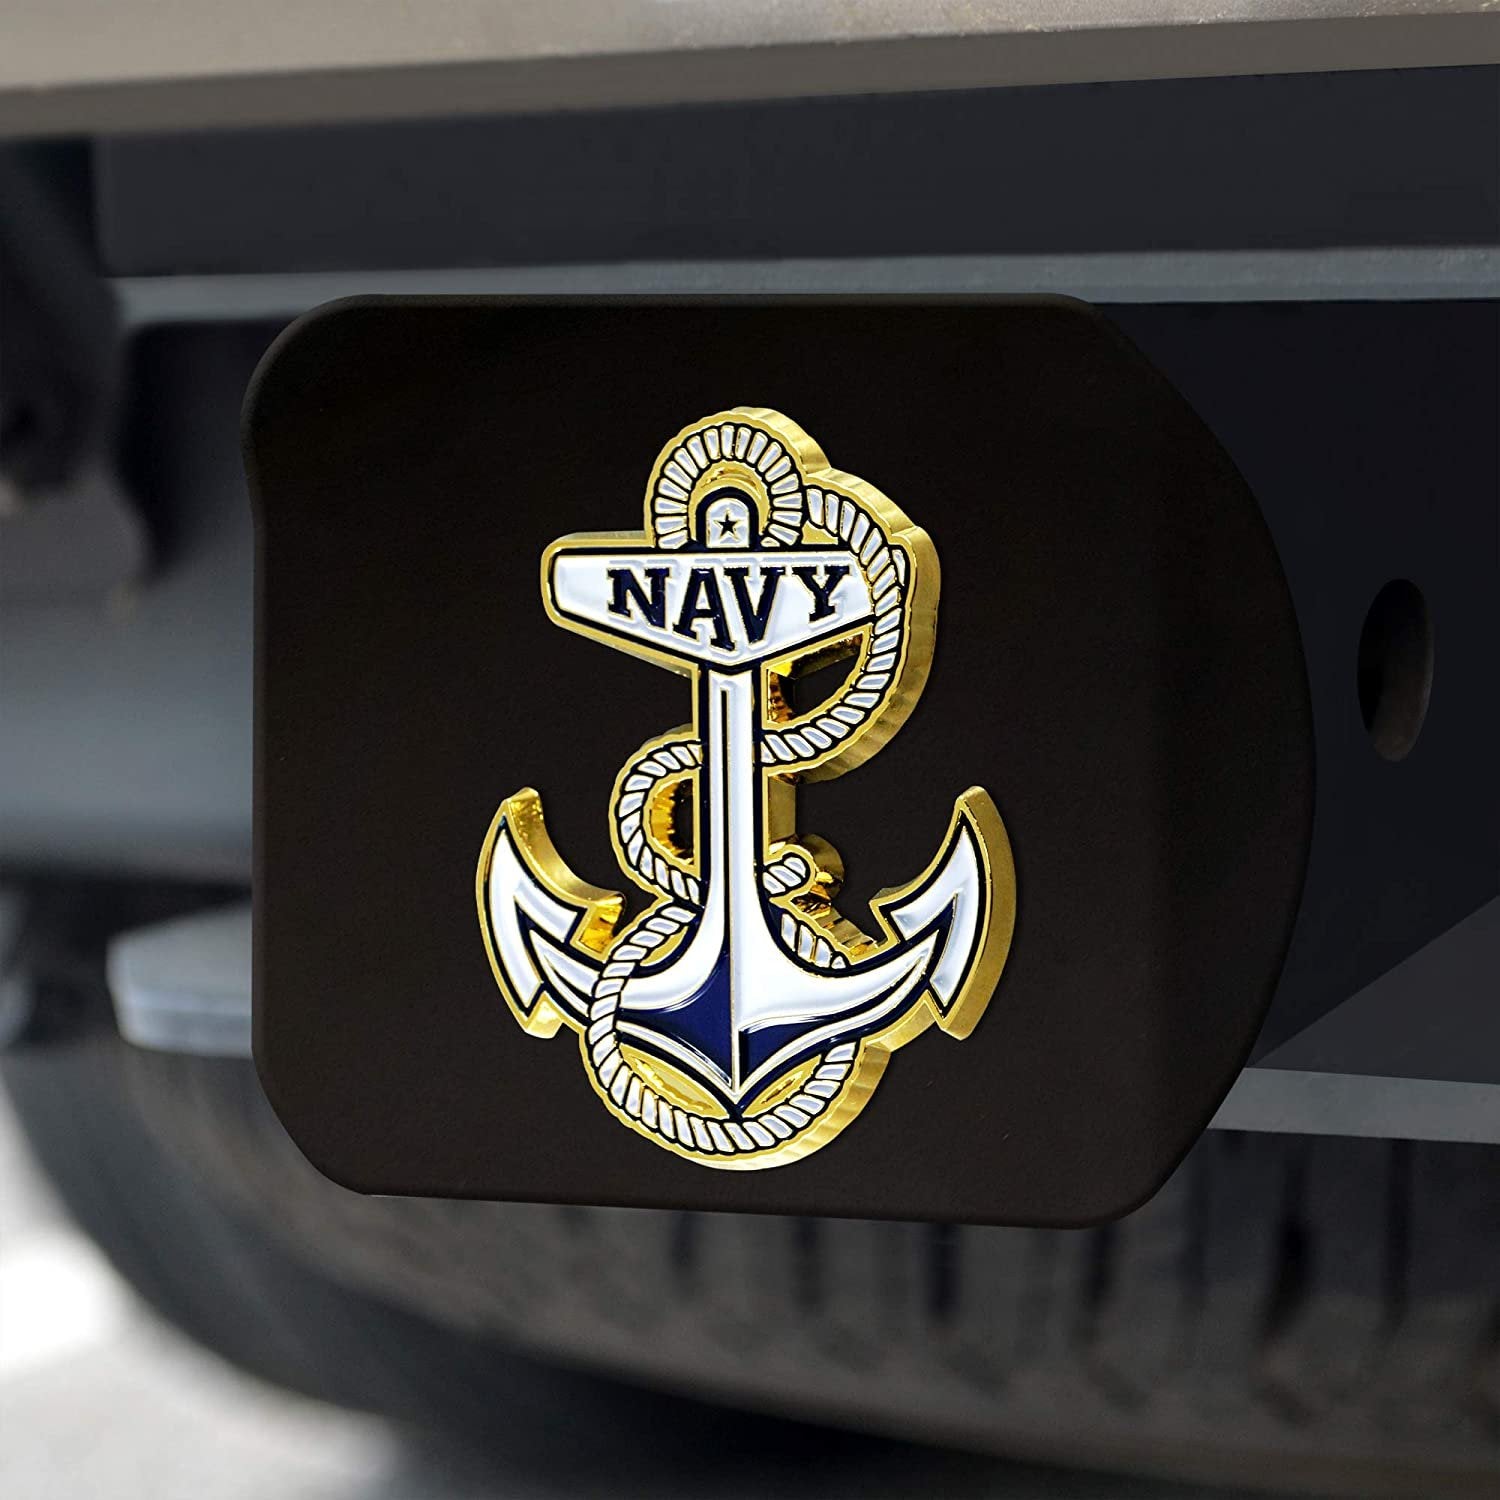 United States Navy Hitch Cover Black Solid Metal with Raised Color Metal Emblem 2" Square Type III Military